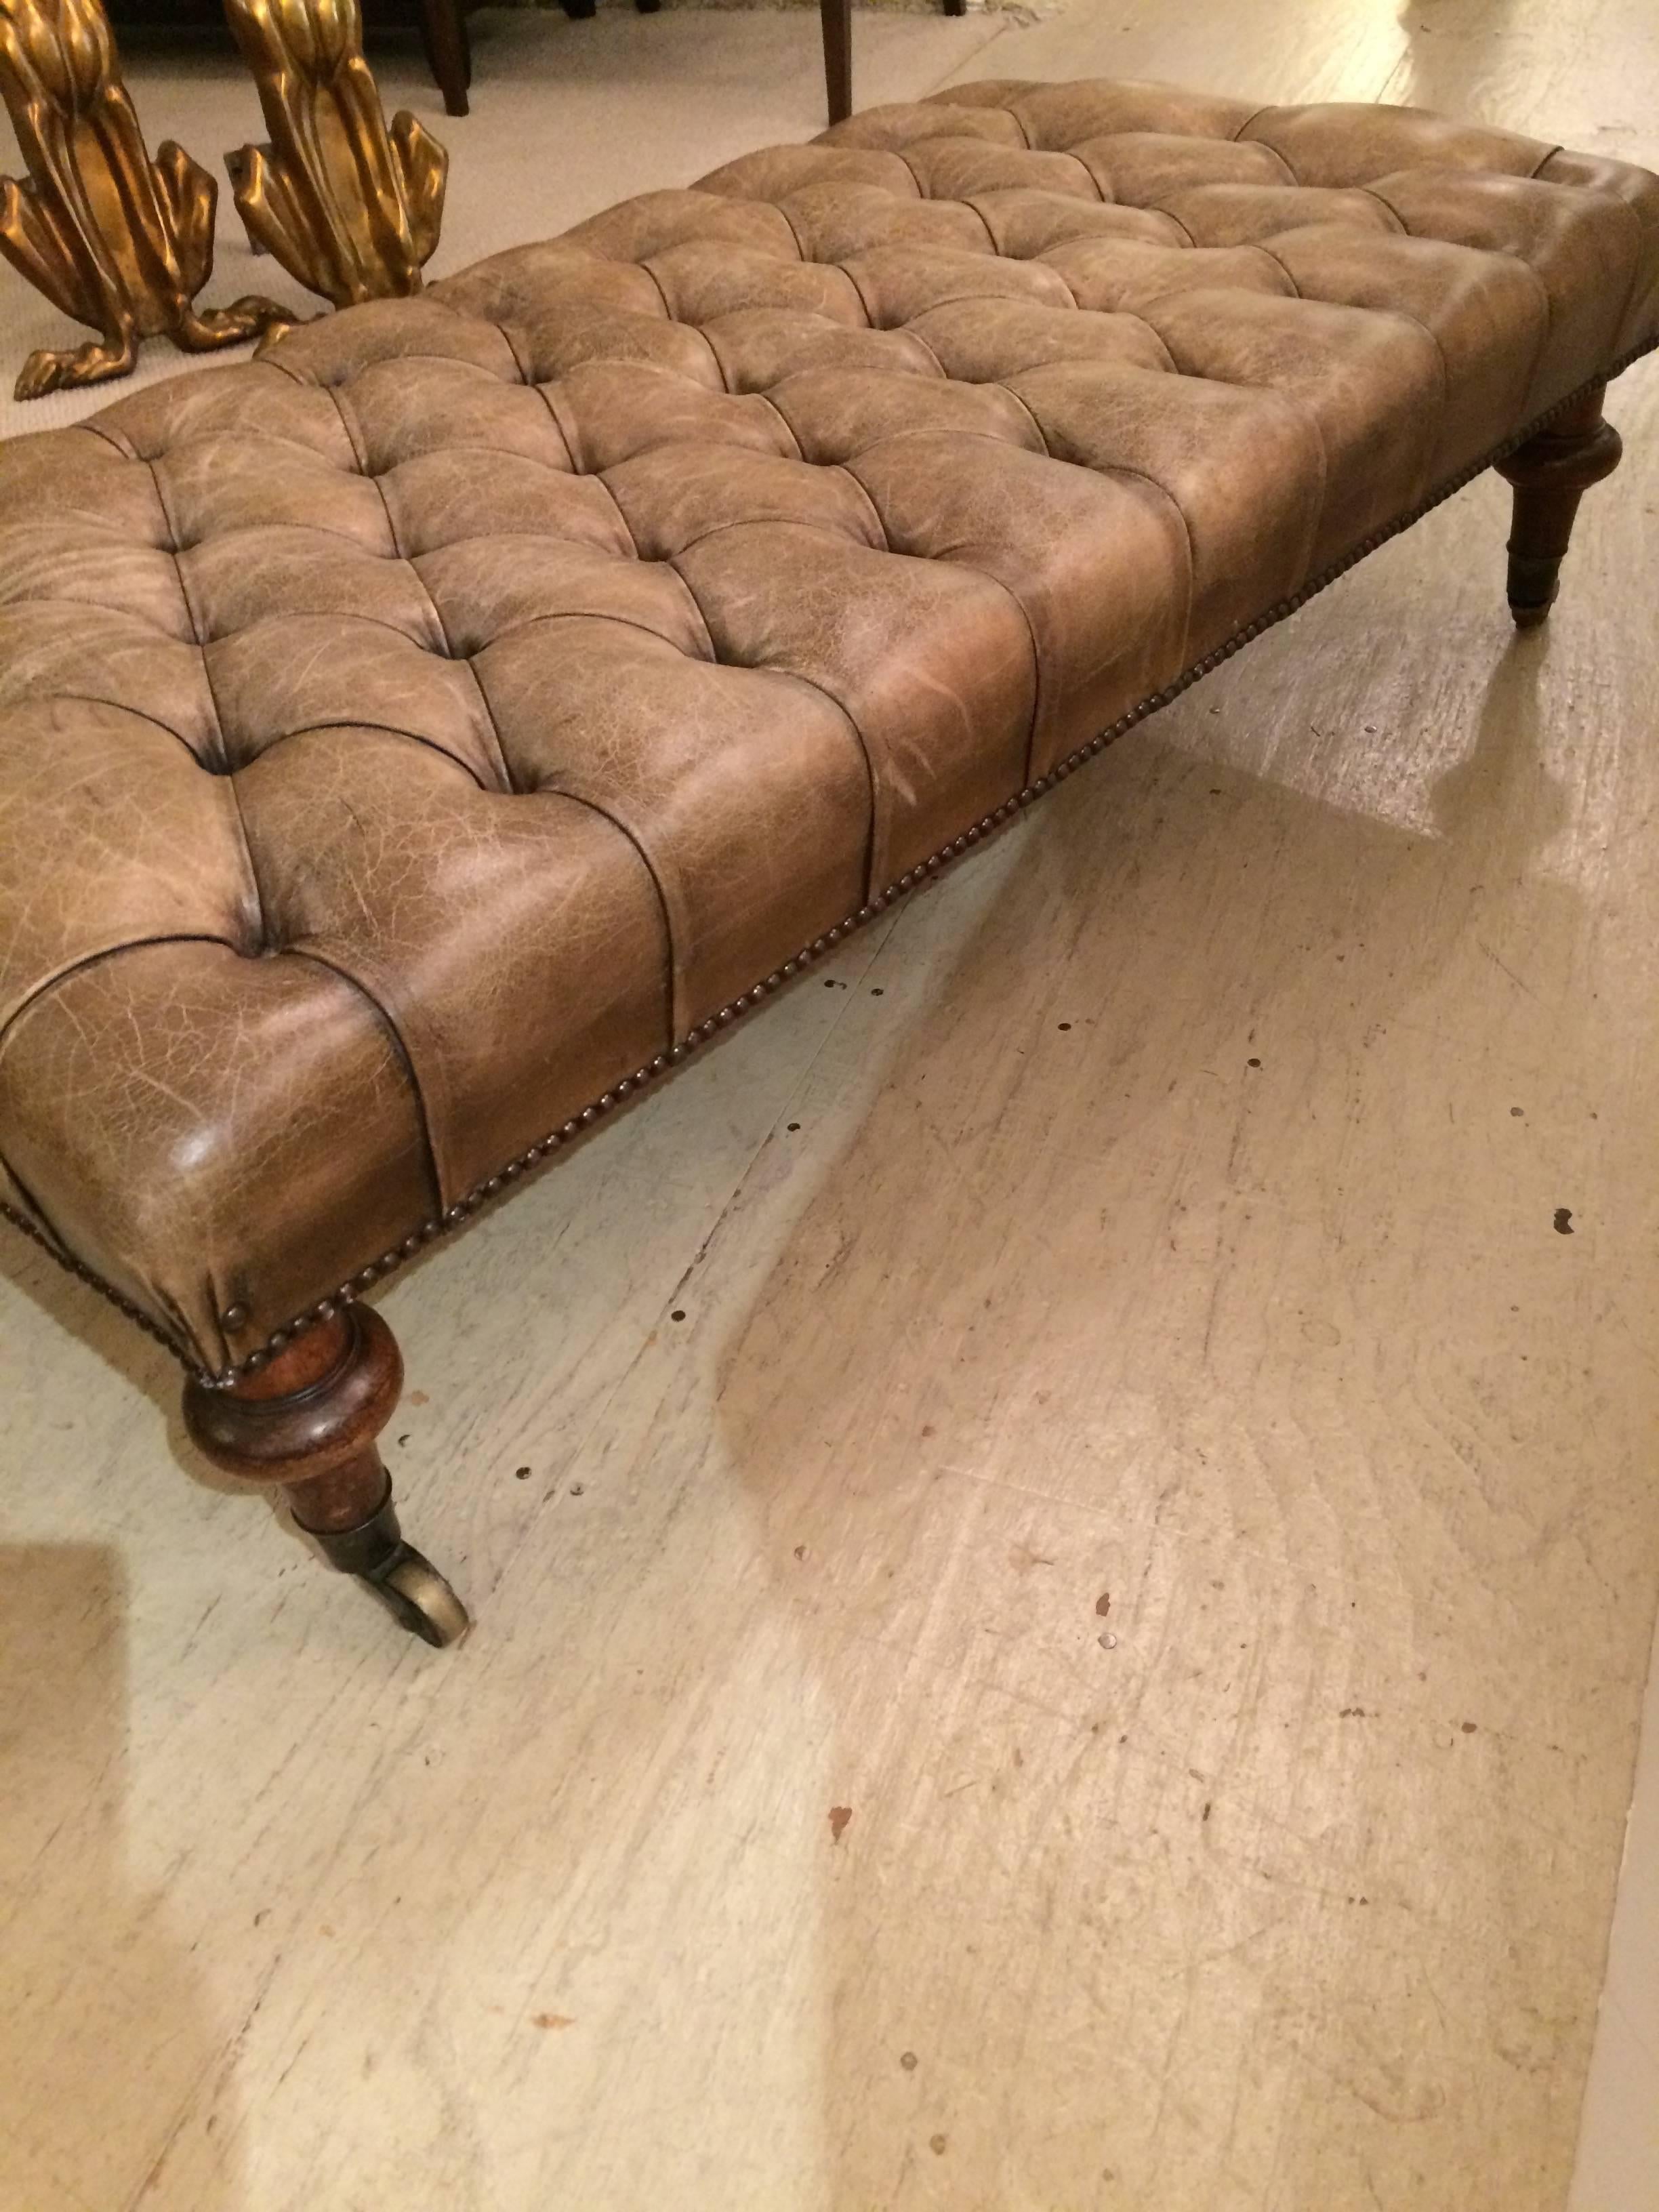 Buttery distressed tufted leather ottoman, bench or coffee table in a wonderful brownish taupe luggage color, with muted brass studs, handsome turned fruitwood legs and brass casters. Top of the line rich and elegant antique from London.